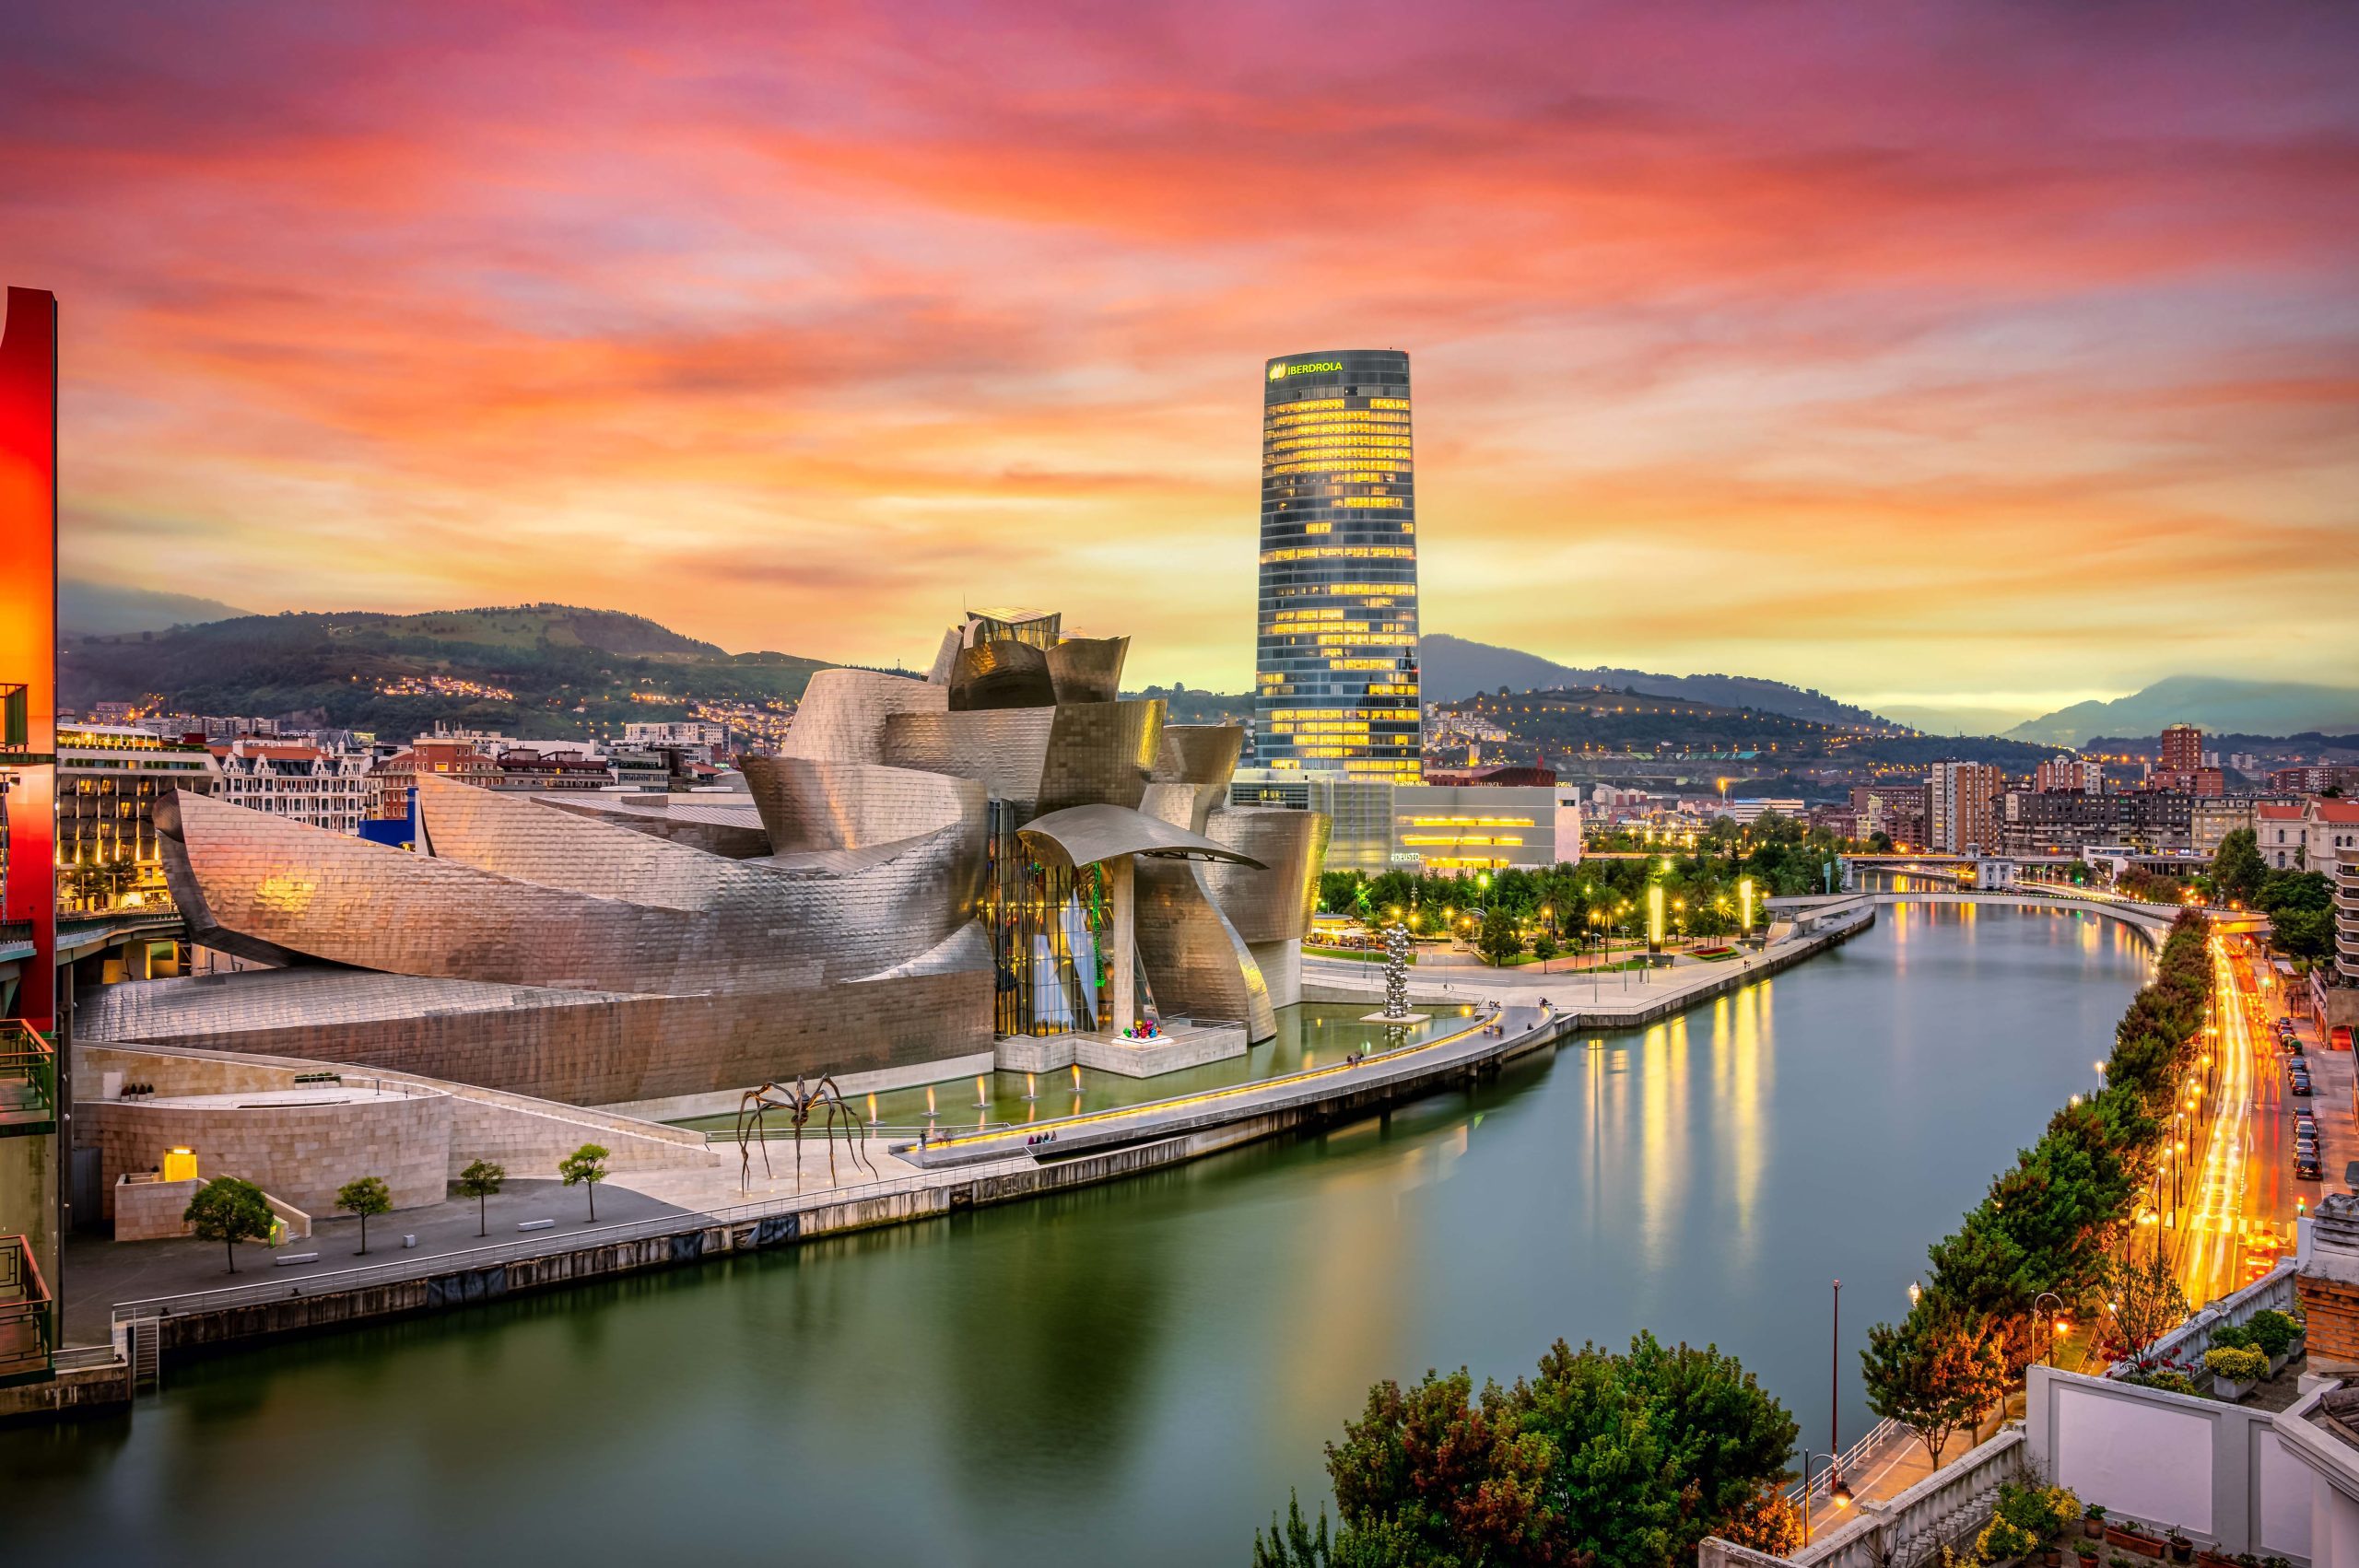 Cityscape of Bilbao at sunset, Spain